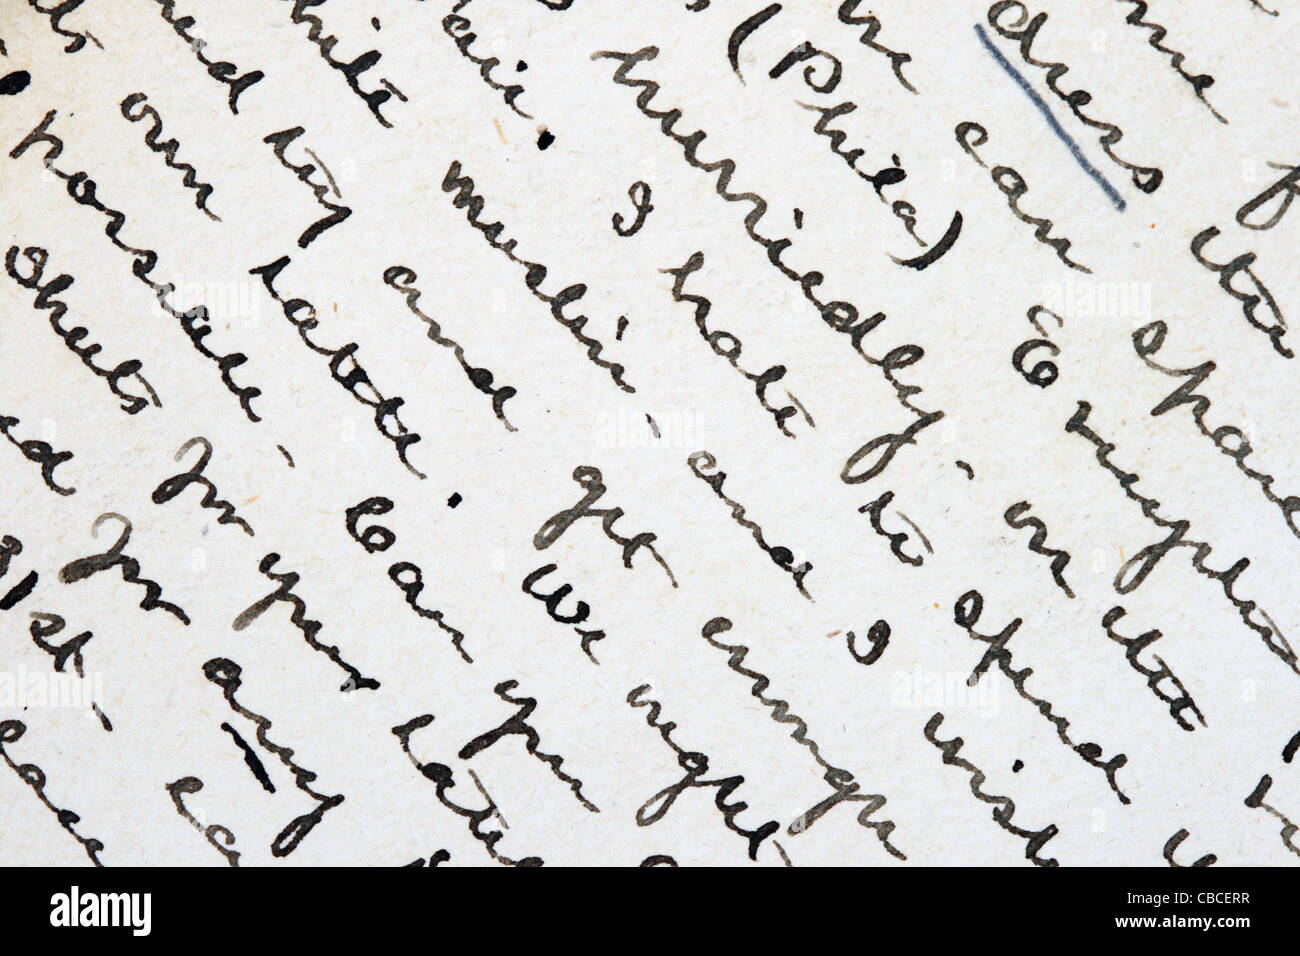 background detail from an old pen and ink letter with cursive writing Stock Photo